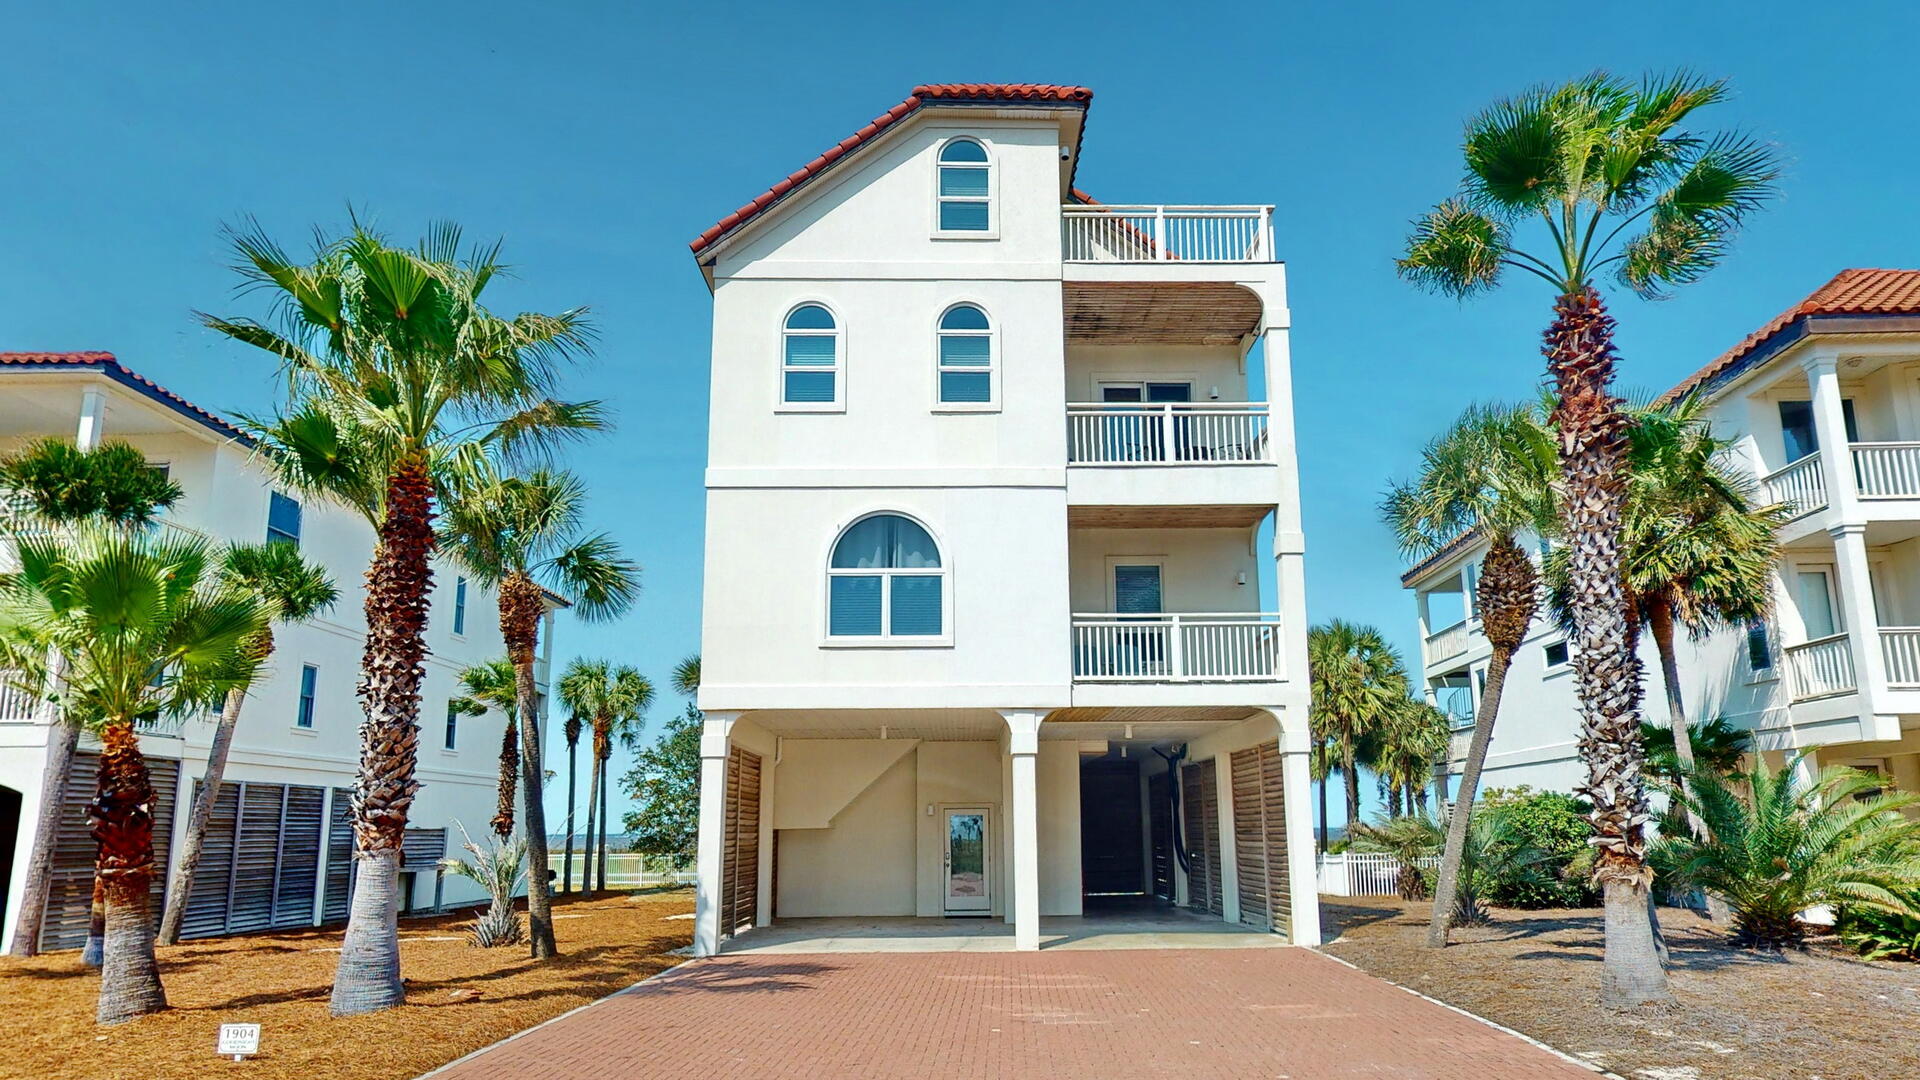 st. george island vacation rentals vs. hotels